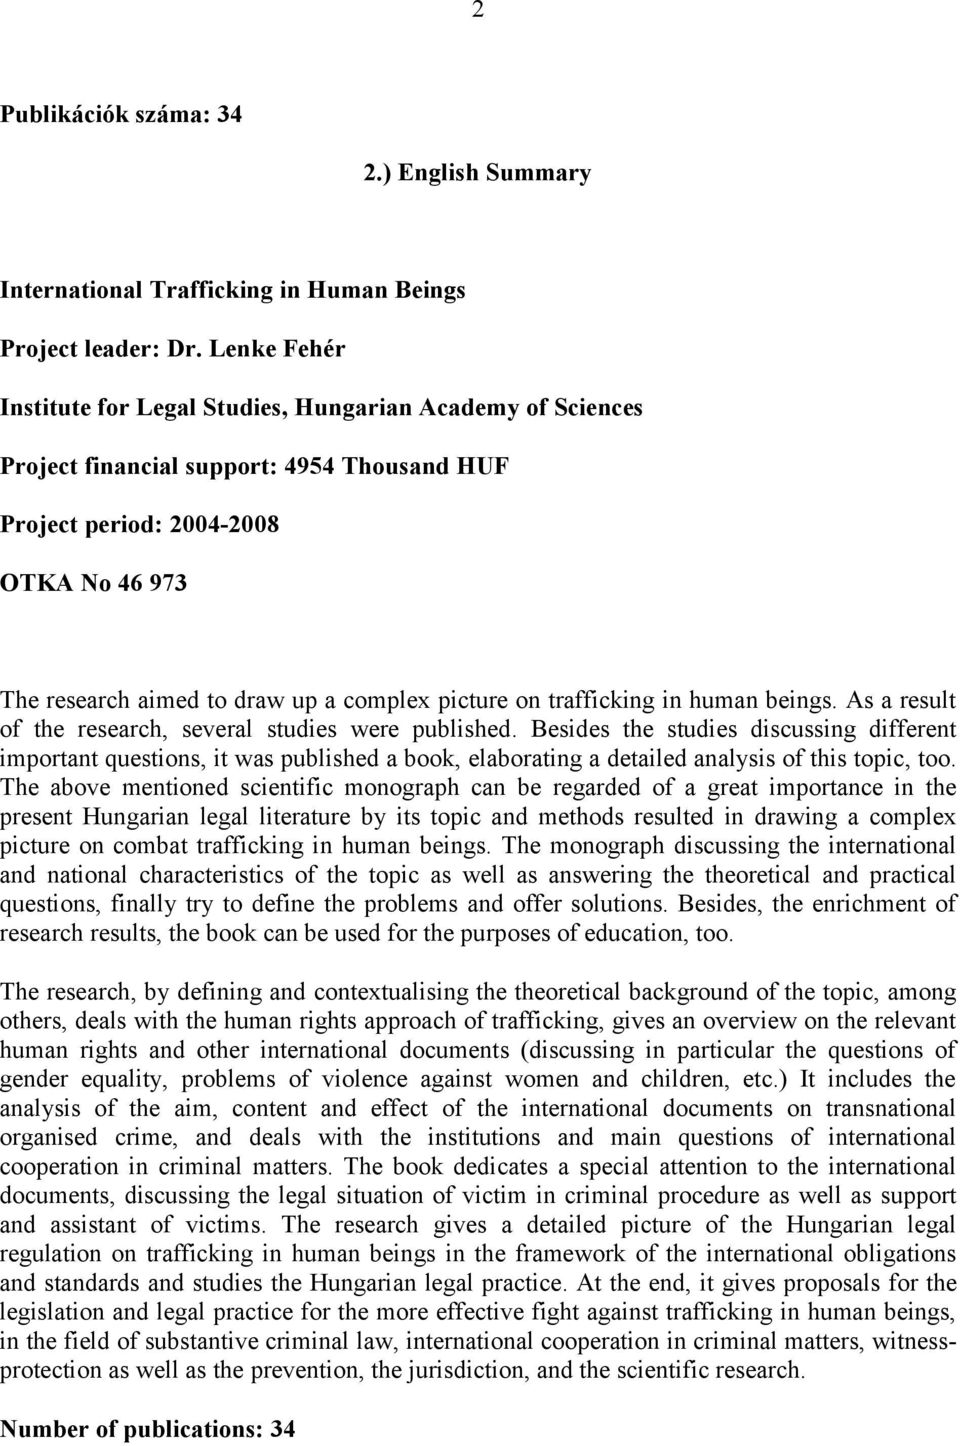 picture on trafficking in human beings. As a result of the research, several studies were published.